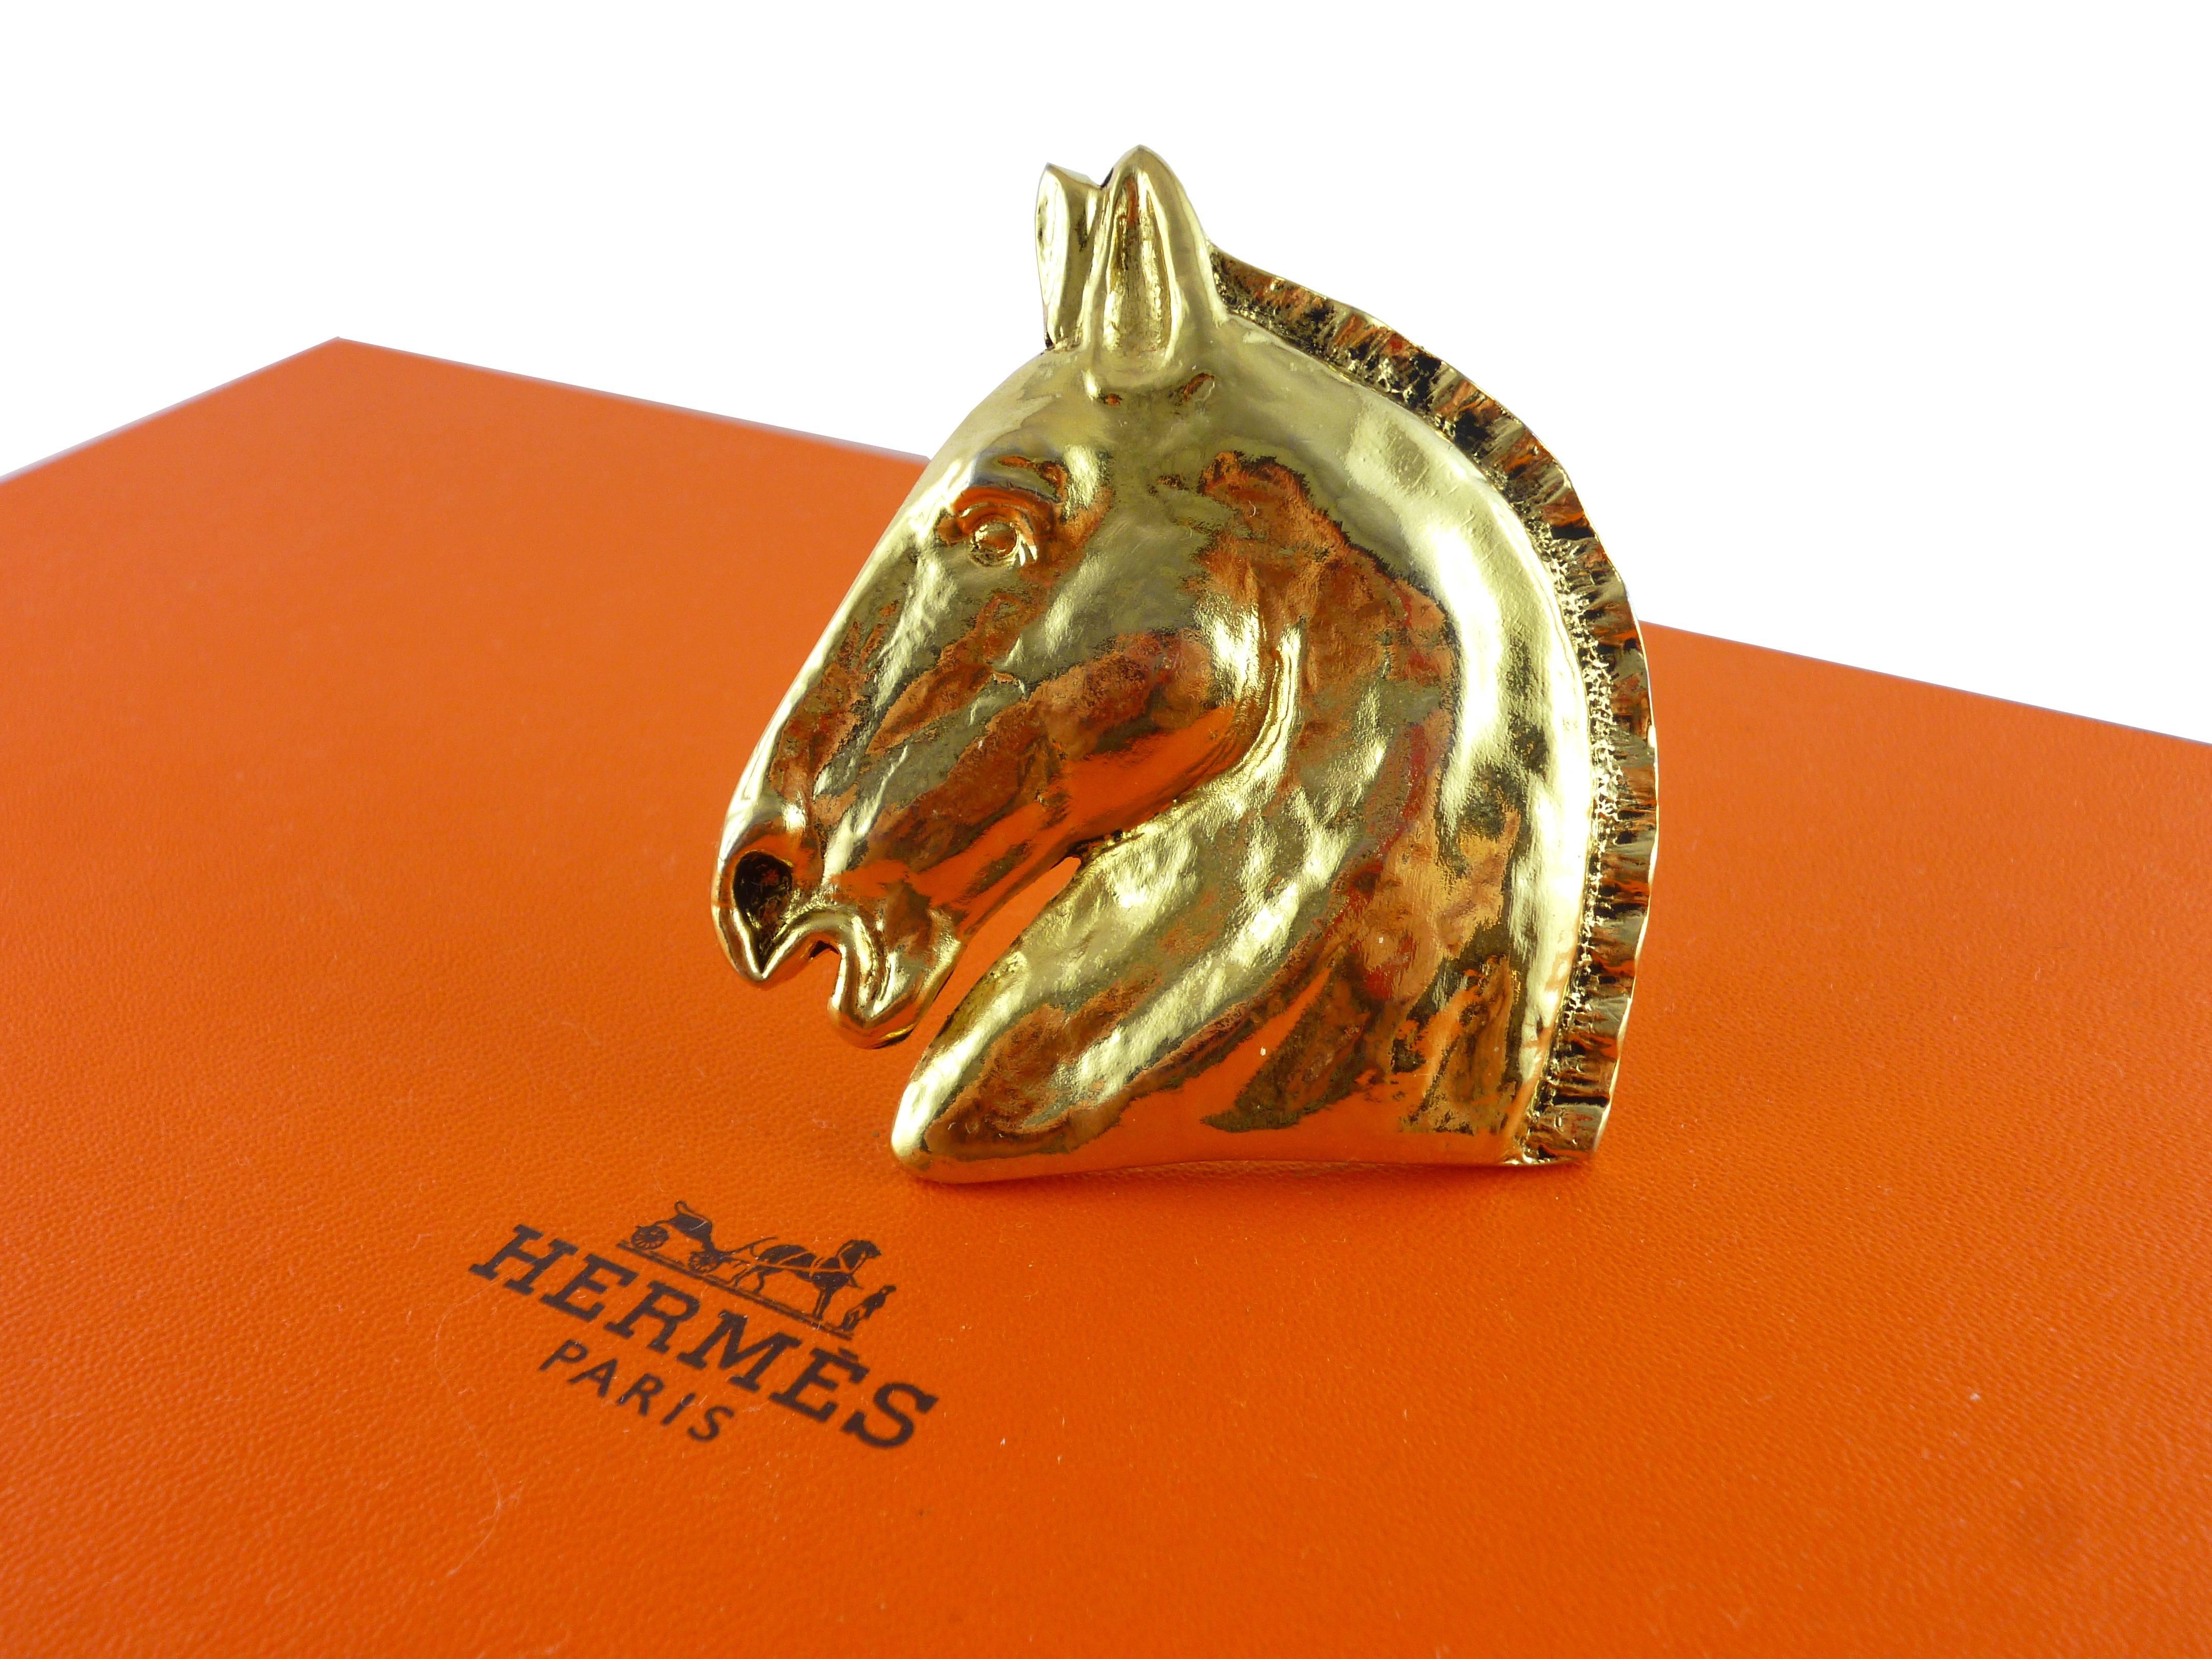 HERMES Paris vintage massive three dimensional gold tone horse head brooch.

Embossed HERMES Paris Bijouterie Fantaisie.

No box provided.

Note
As a buyer, you are fully responsible for customs duties, other local taxes and any